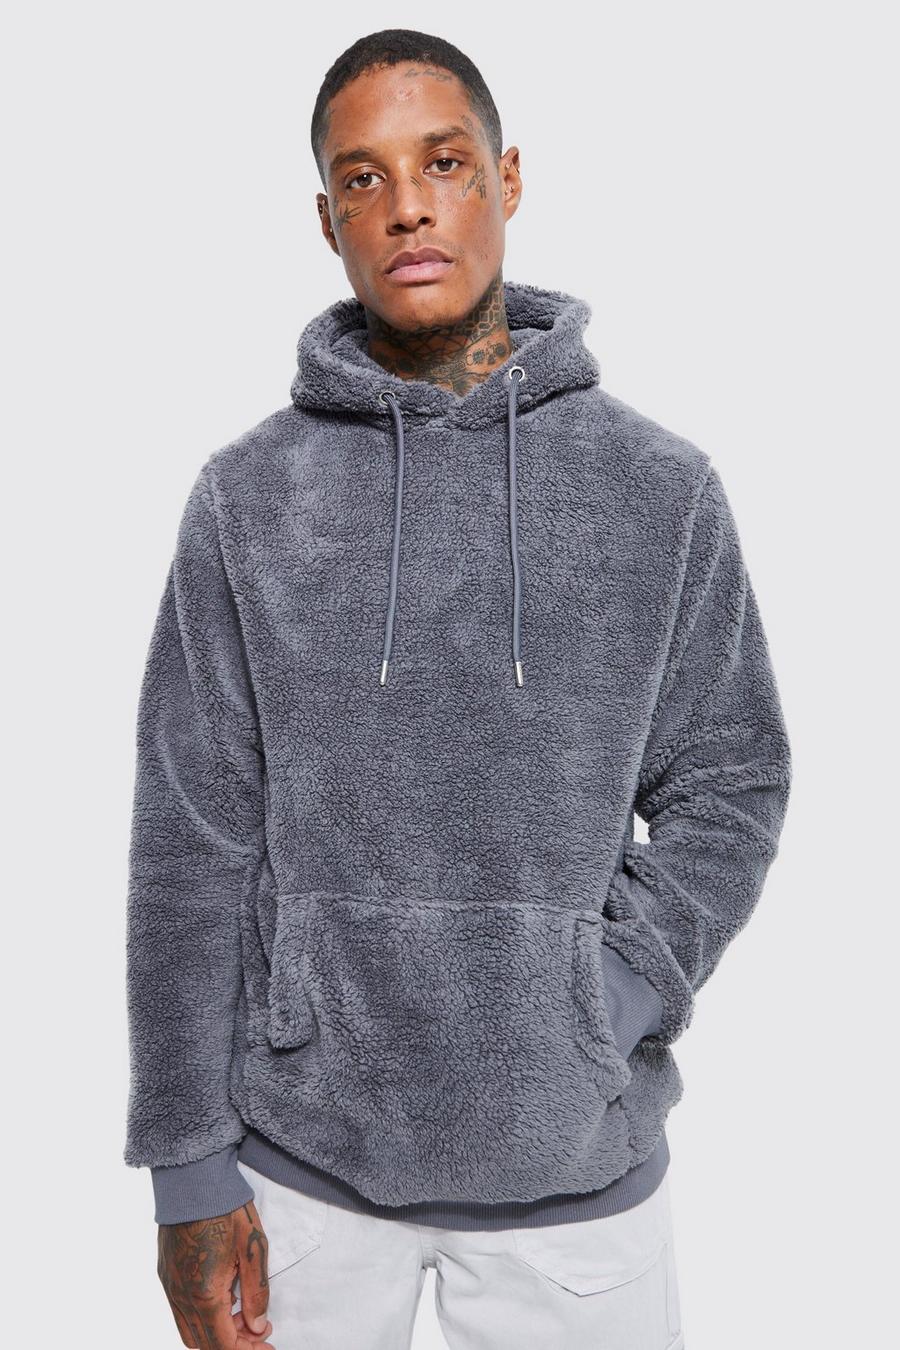 Charcoal grey Borg Over The Head Hoodie